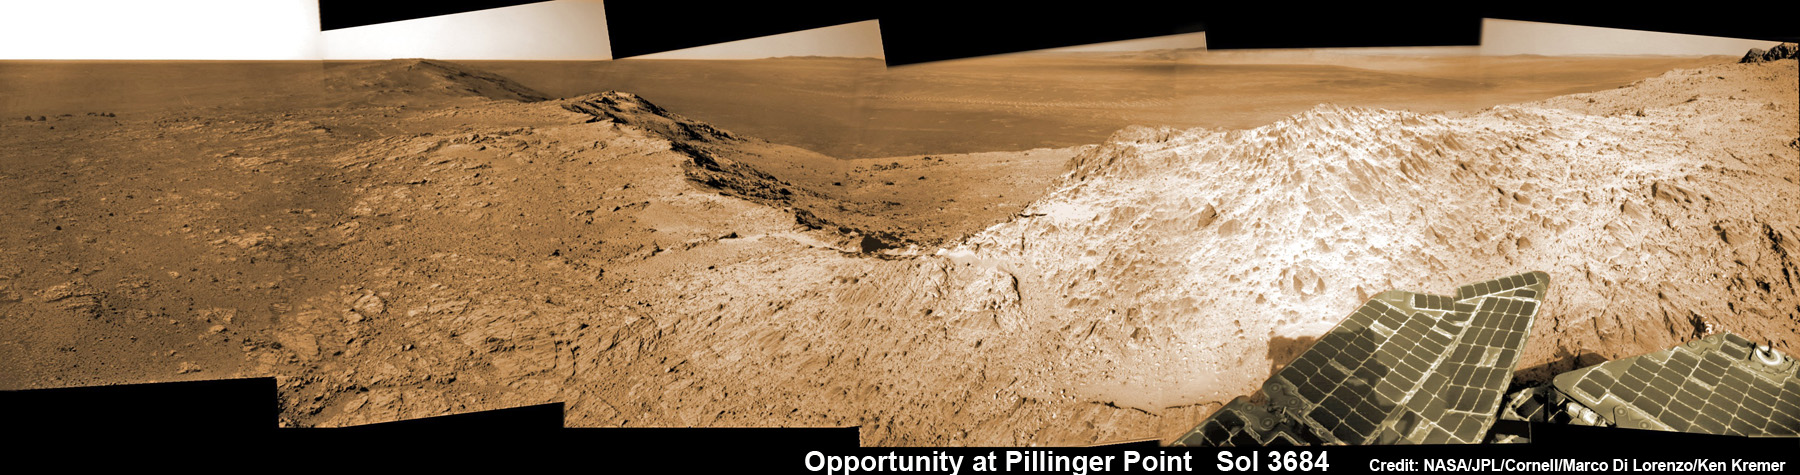 Opportunity Mars rover peers into vast Endeavour Crater from Pillinger Point mountain ridge named in honor of Colin Pillinger, the Principal Investigator for the British Beagle 2 lander built to search for life on Mars. Pillinger passed away from a brain hemorrhage on May 7, 2014. This navcam camera photo mosaic was assembled from images taken on June 5, 2014 (Sol 3684) and colorized. Credit: NASA/JPL/Cornell/Marco Di Lorenzo/Ken Kremer-kenkremer.com